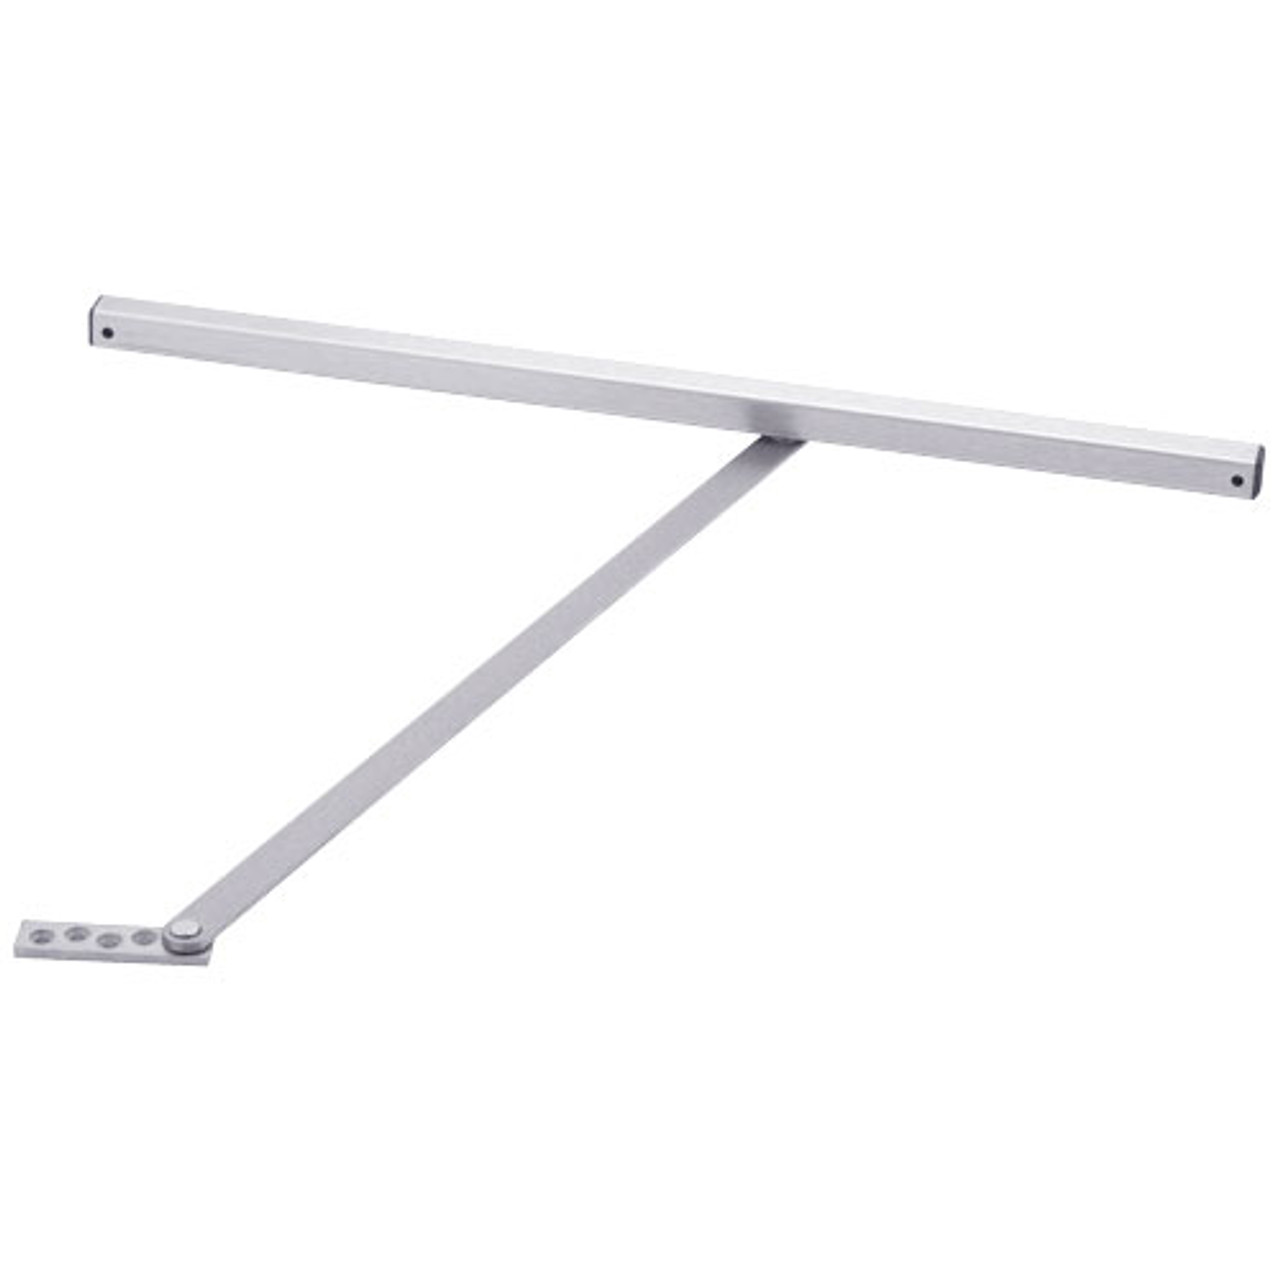 454S-US32-SHIM-3 Glynn Johnson 450 Series Medium Duty Surface Overhead in Polished stainless steel